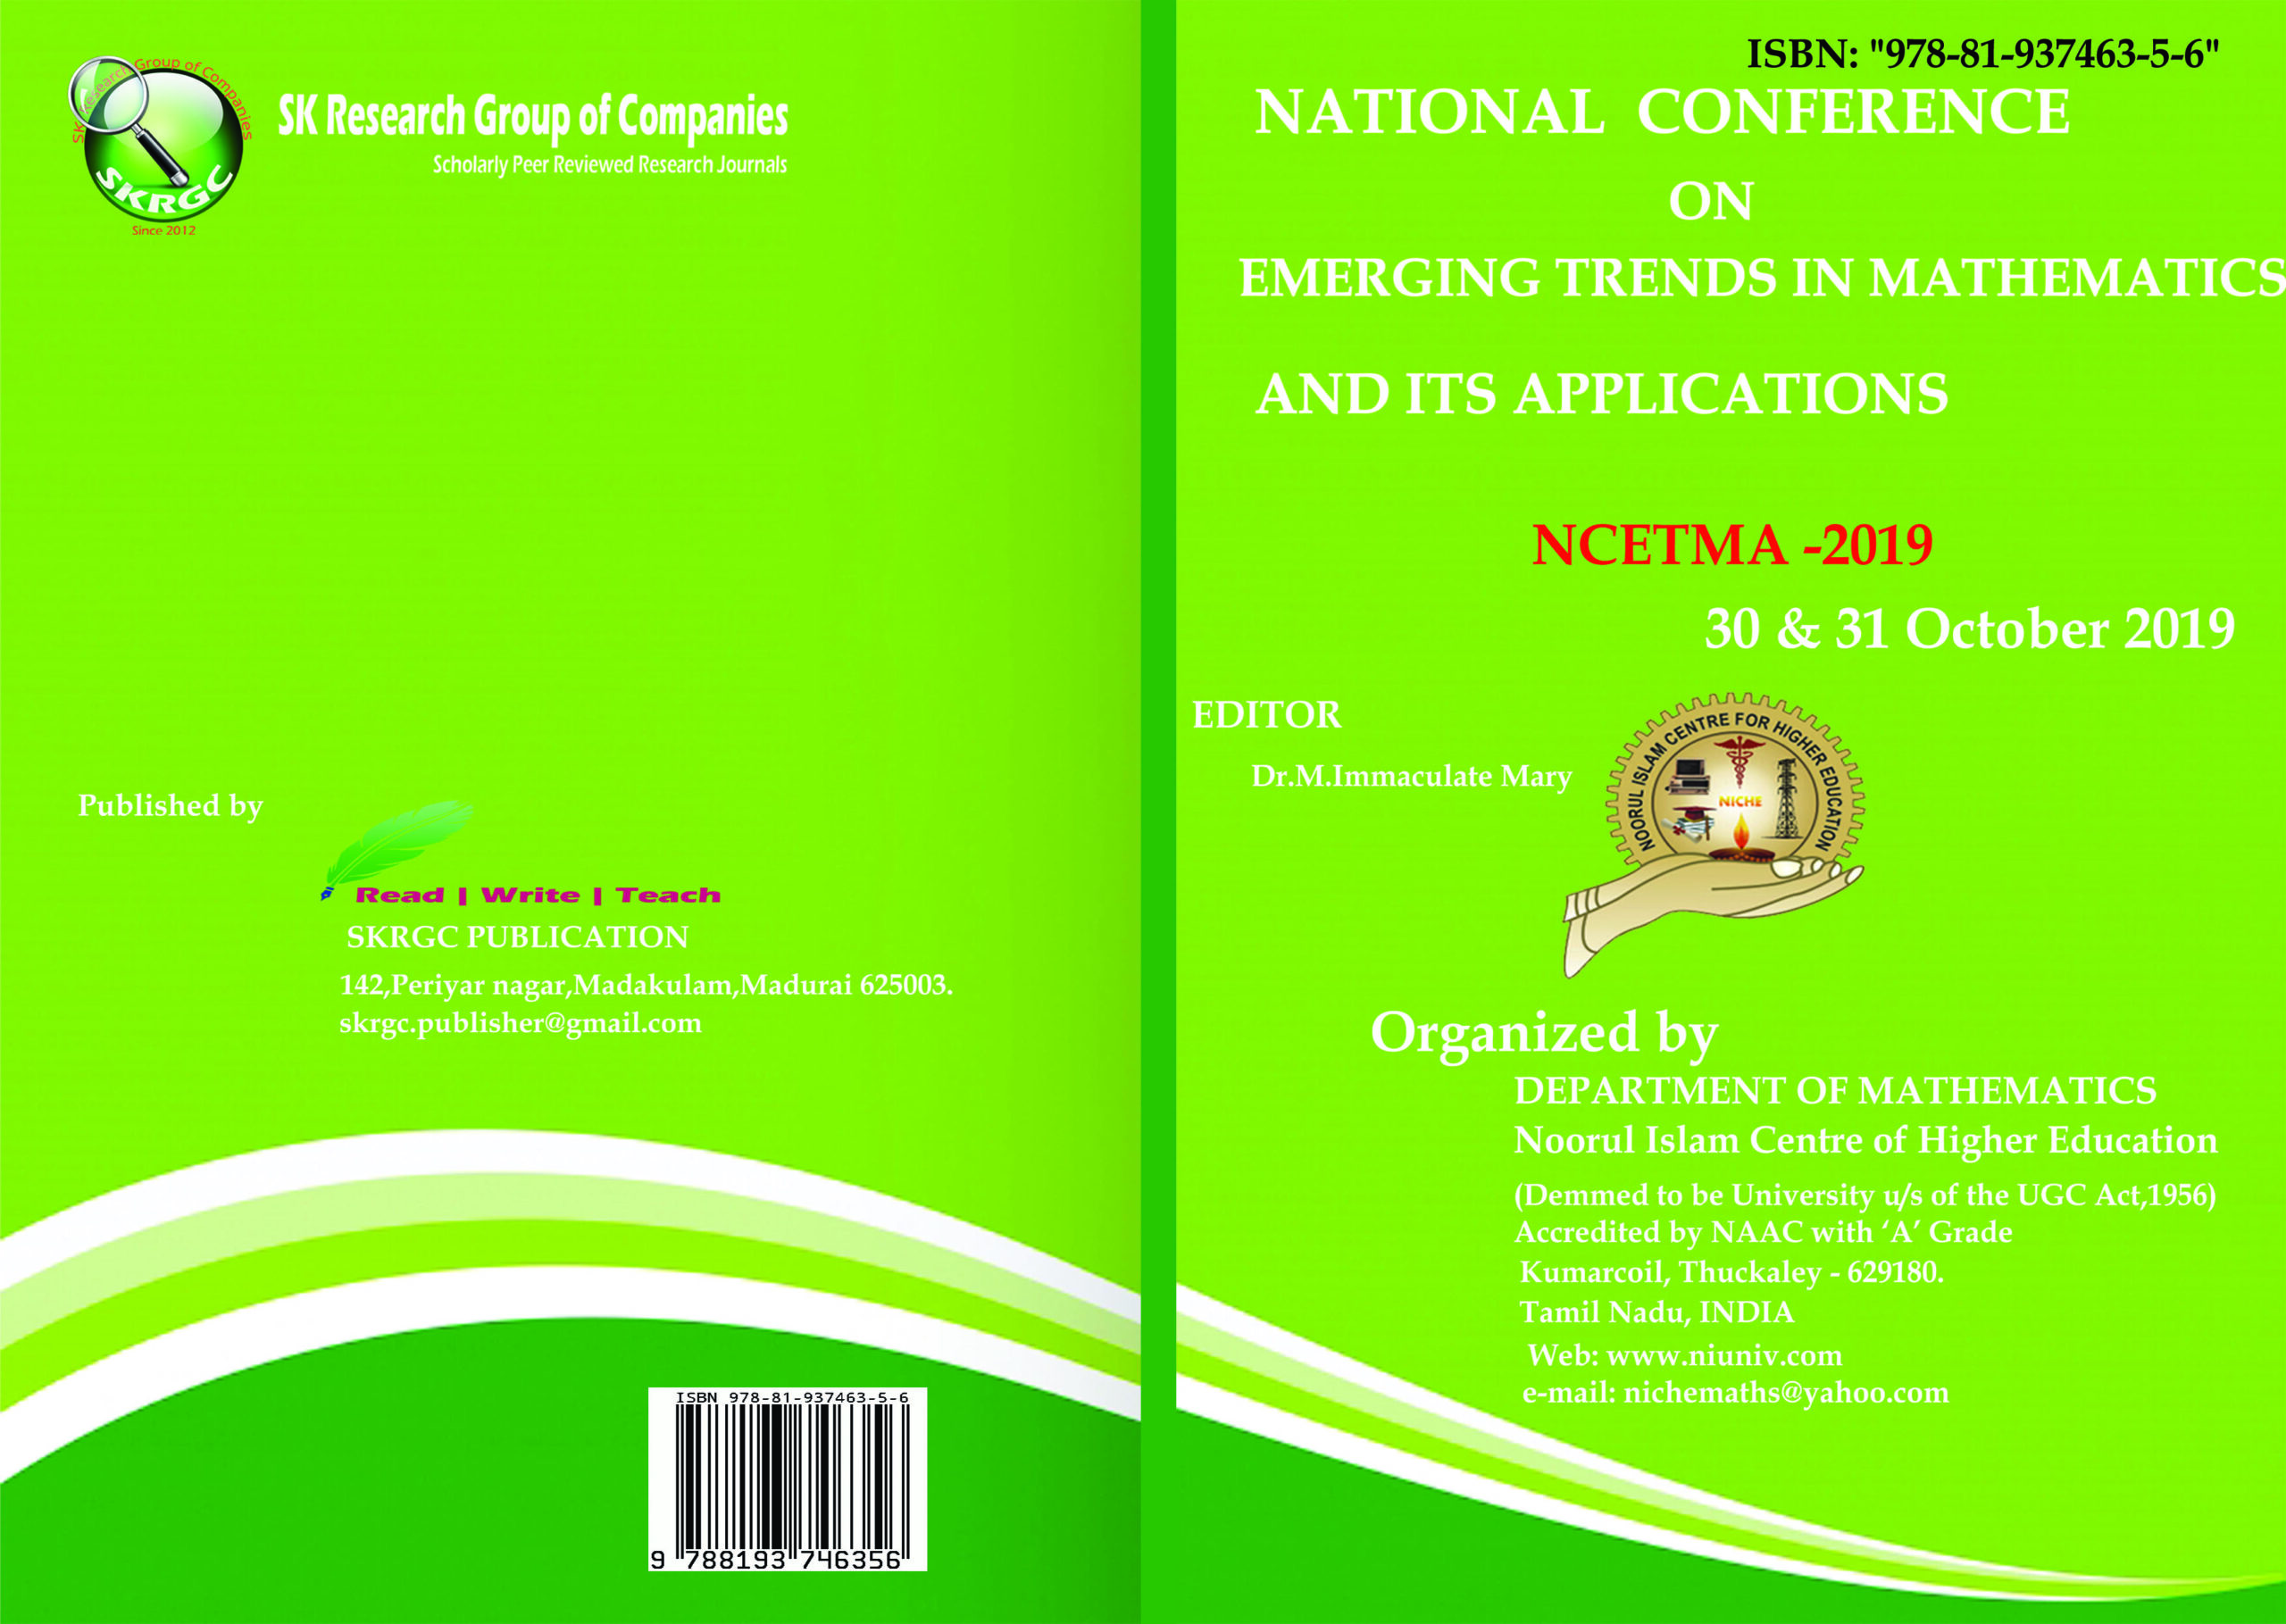 Proceedings of National Conference on Emerging Trends in Mathematics and its Applications